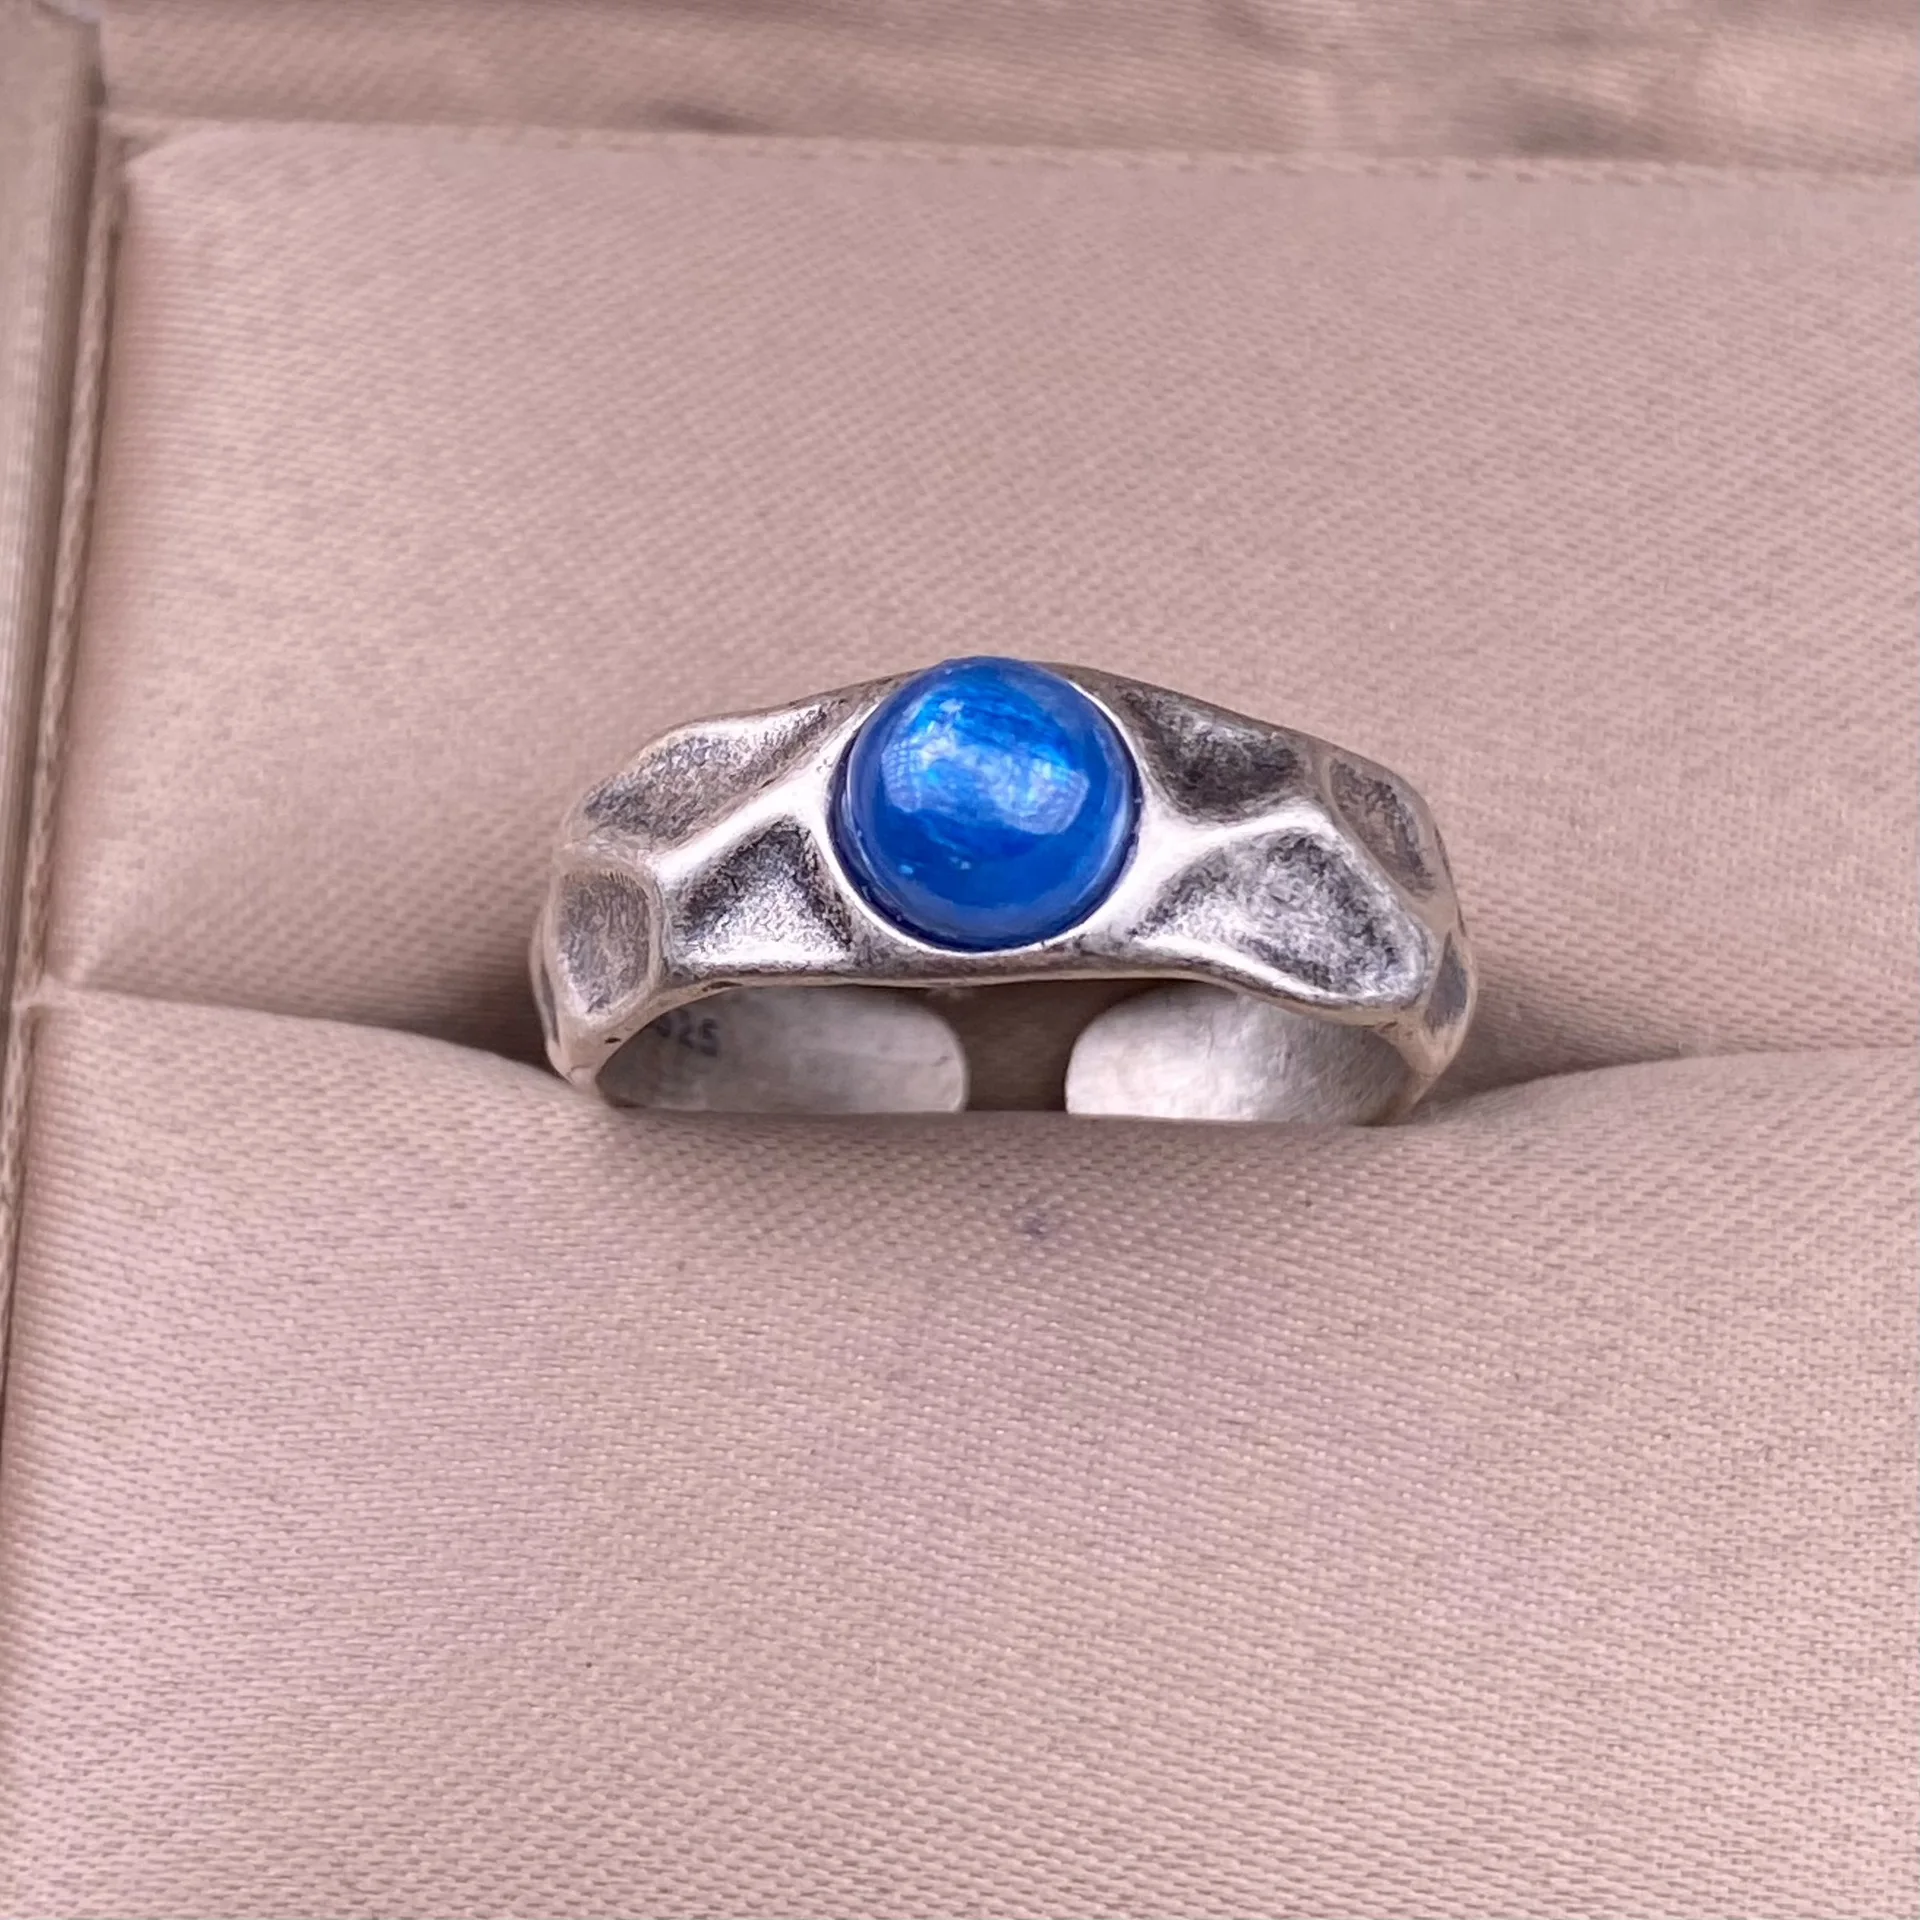 

HOYON Natural Sapphire Ruby Women's Ring s925 Sterling Silver Vintage Blue Moonlight Stone Men's Wide Ring Couple Jewelry gift